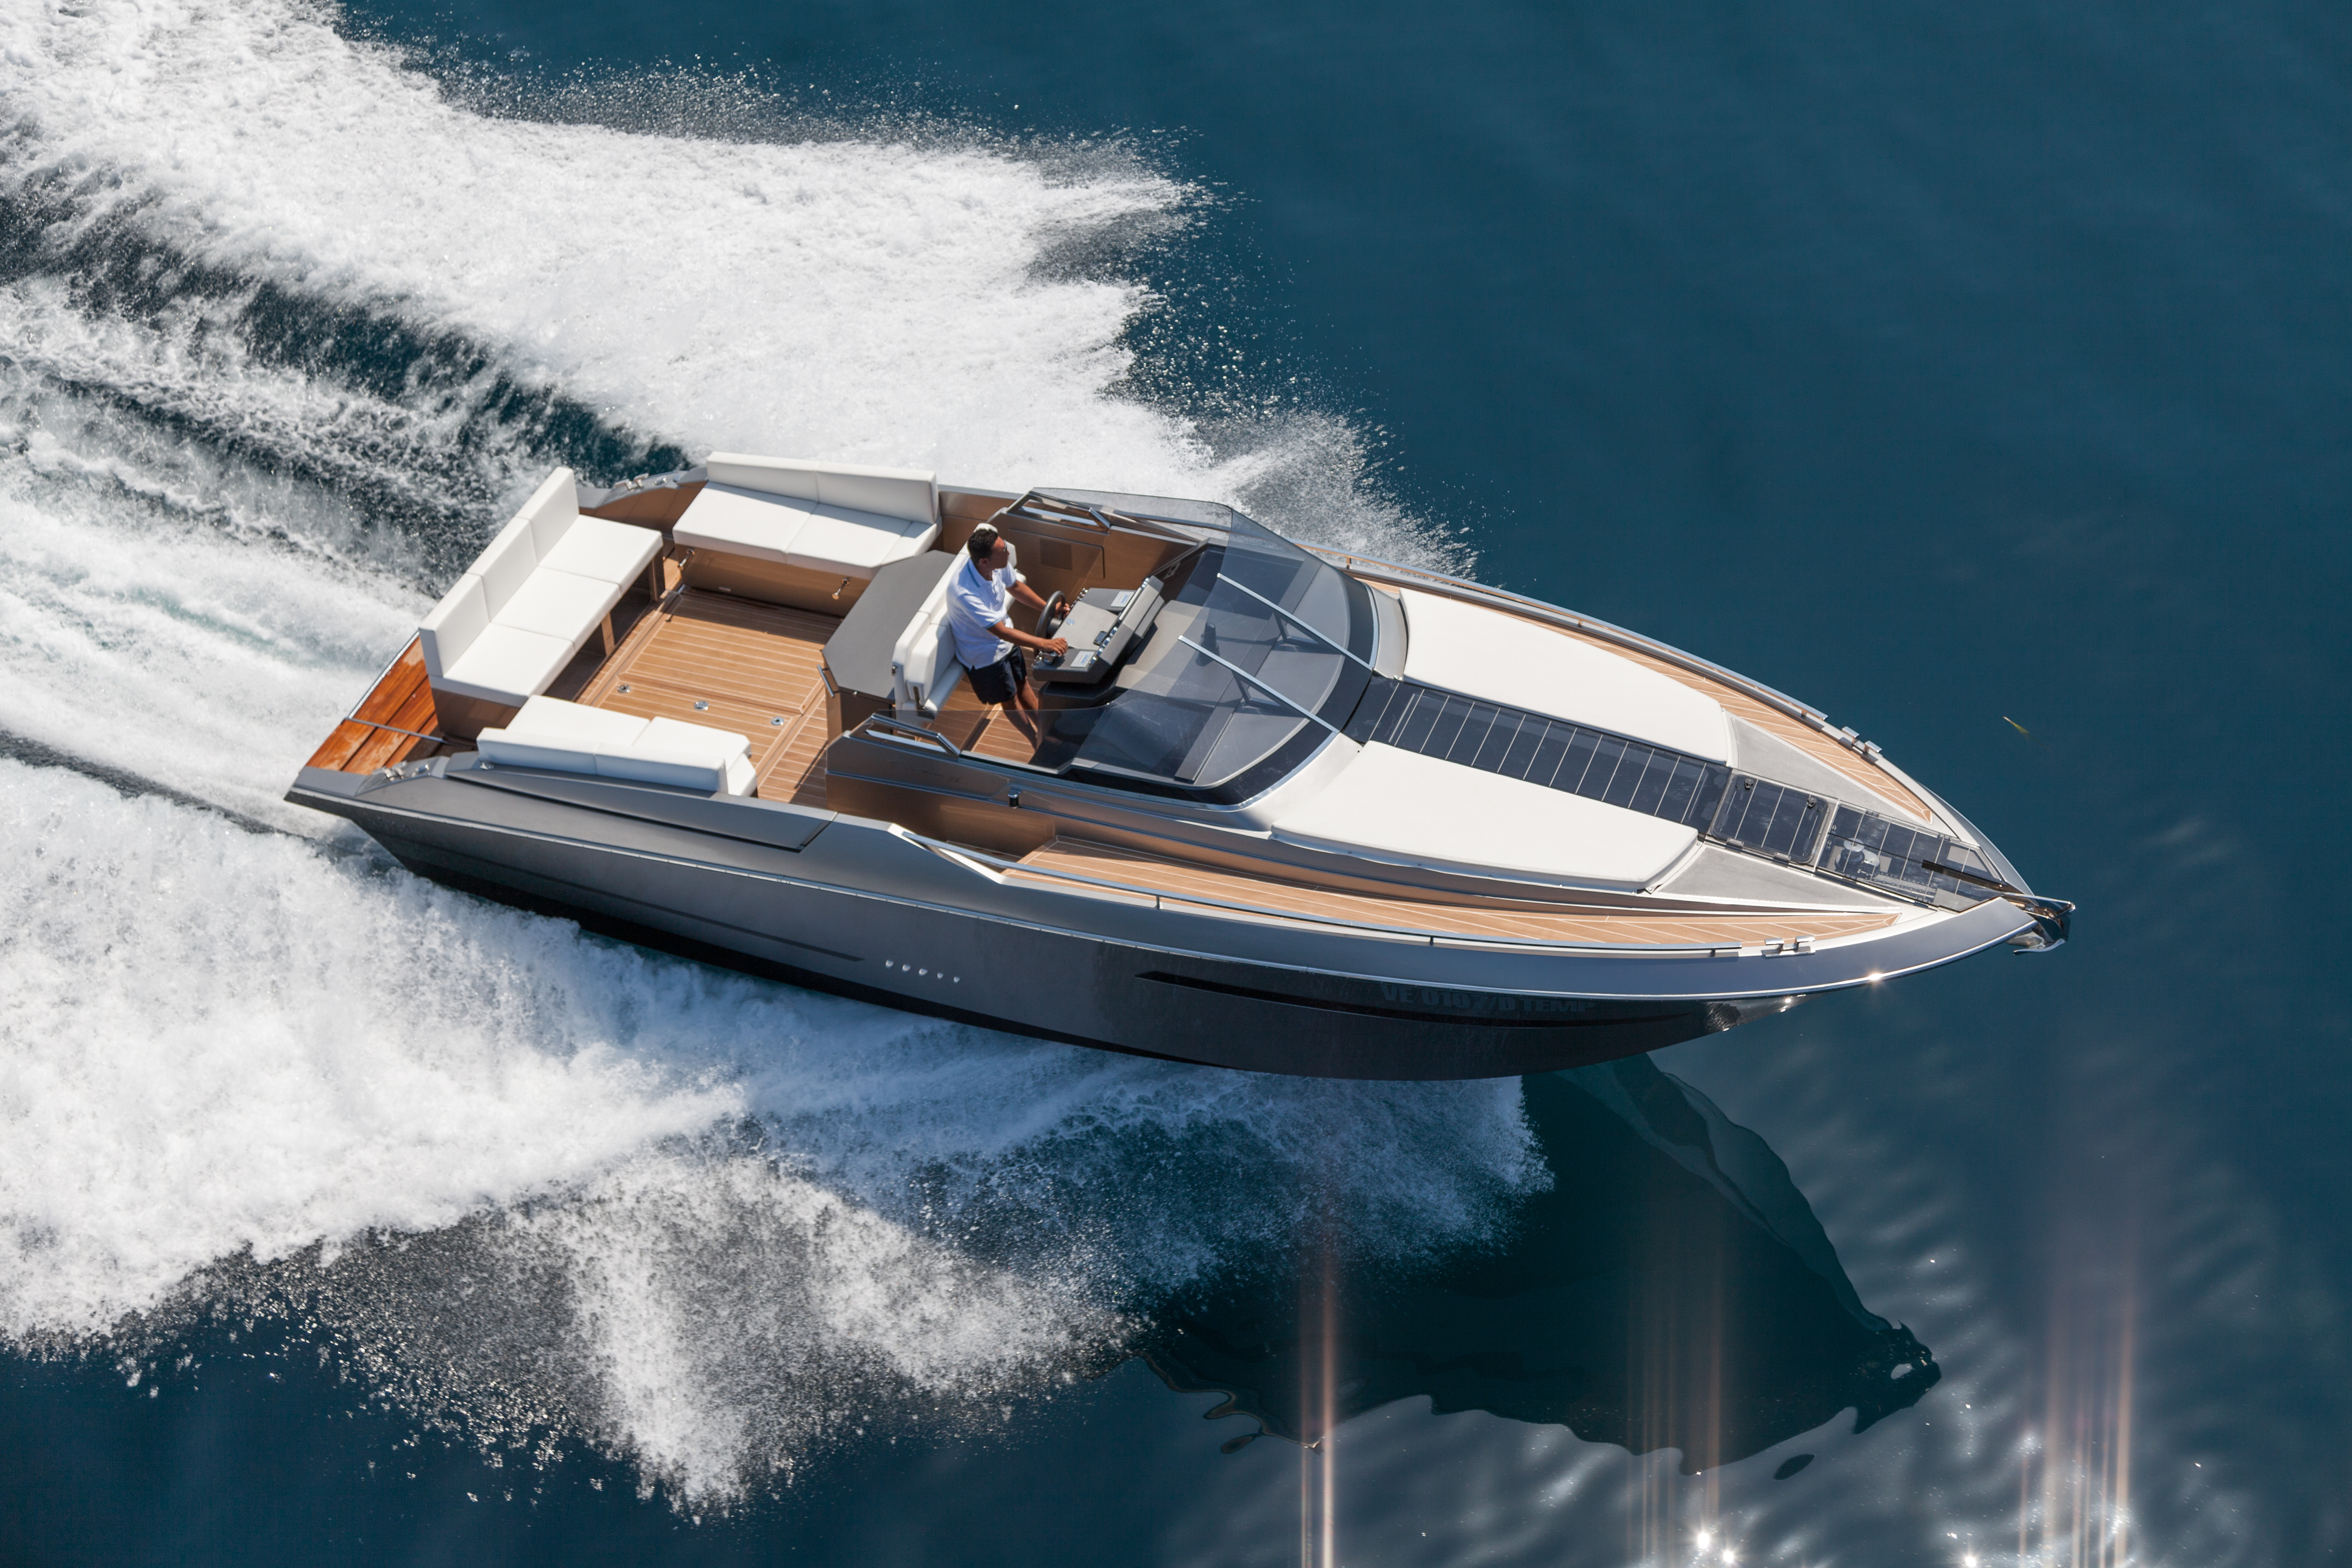 A Look at 5 Popular Luxury Speedboat Models to Consider